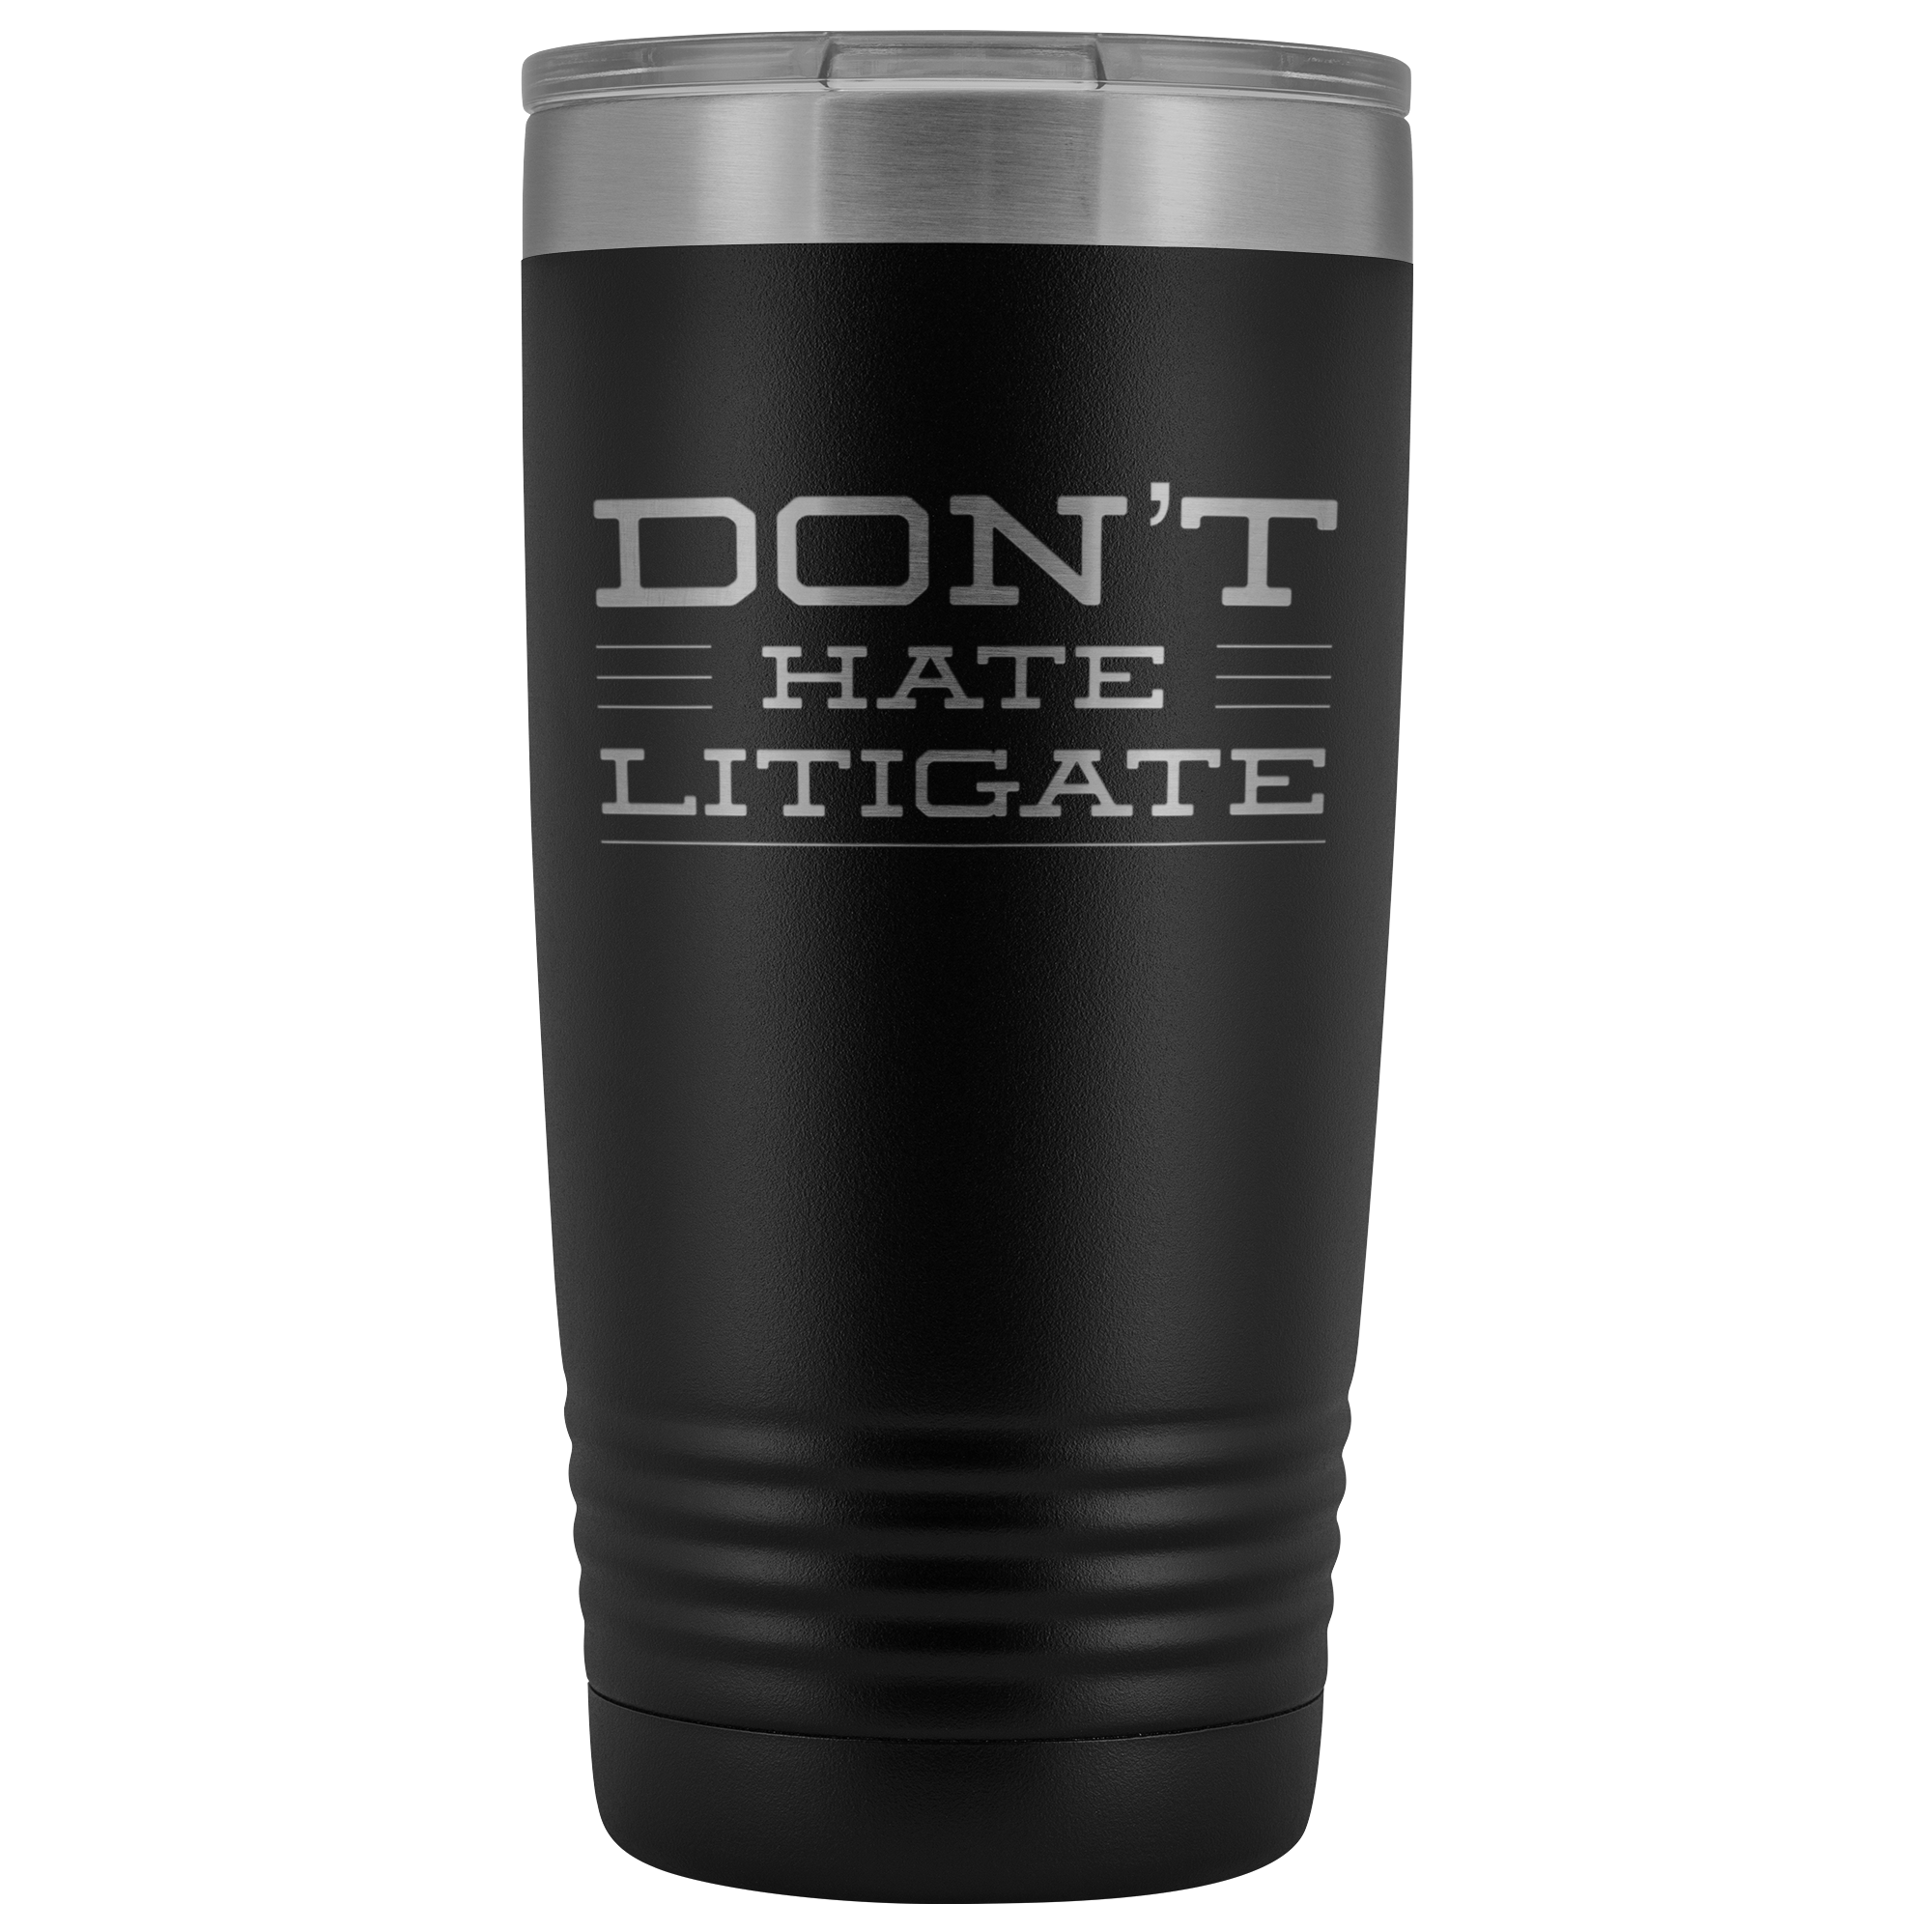 Bar Exam Gift Don't Hate Litigate Lawyer Gifts for Women Men Present Tumbler Funny Metal Mug Insulated Hot Cold Travel Cup 20oz BPA Free